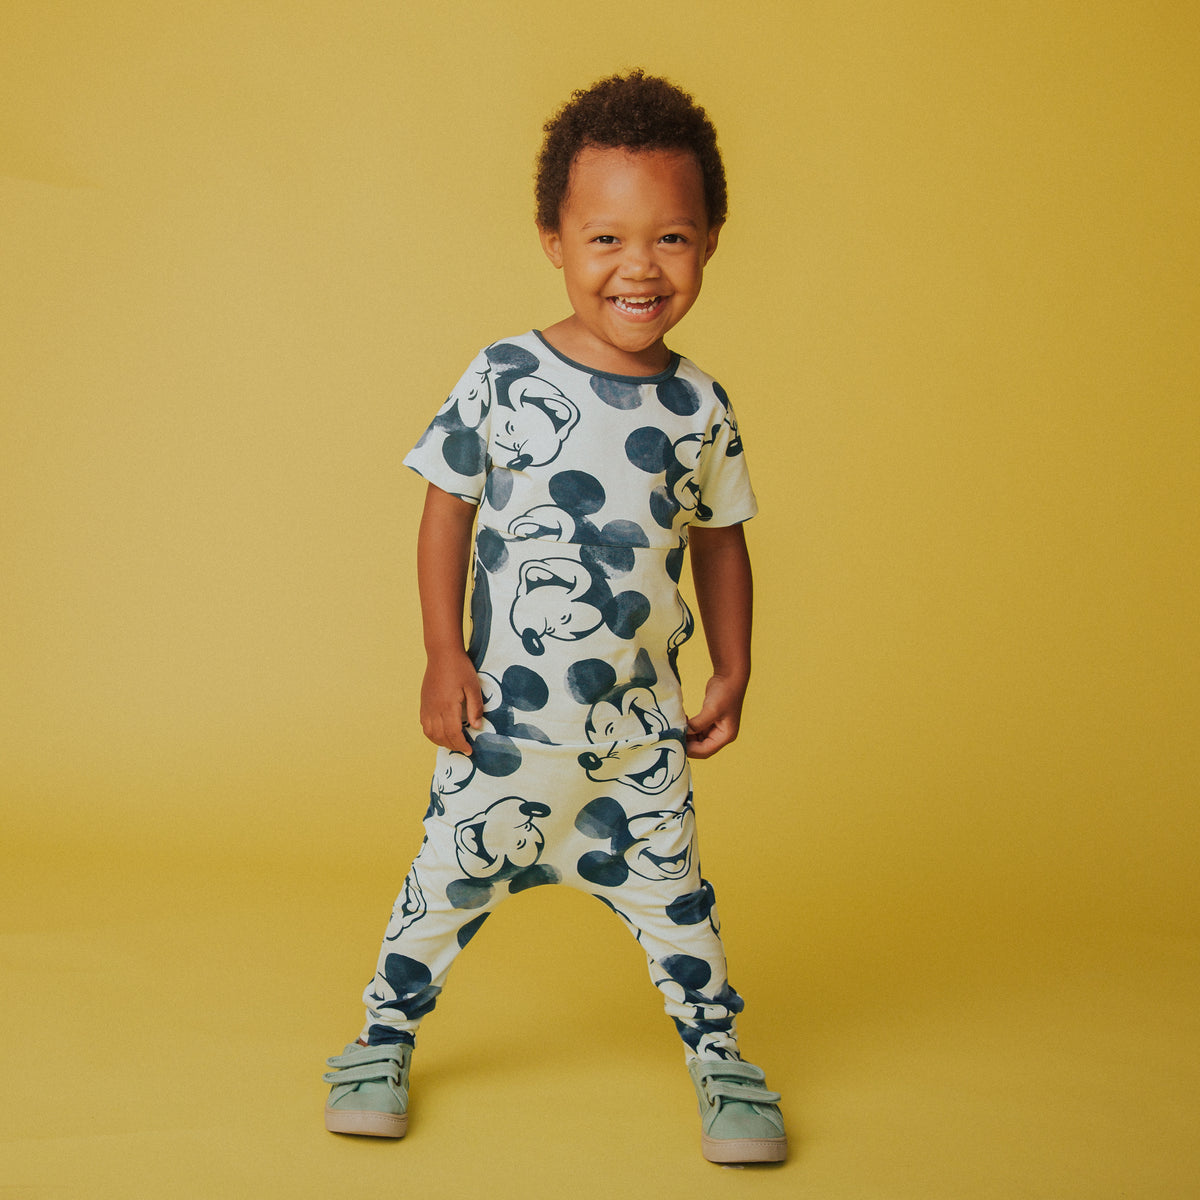 Kids and Baby Clothes | Rompers, T-Shirts, & More | RAGS.com · RAGS.com